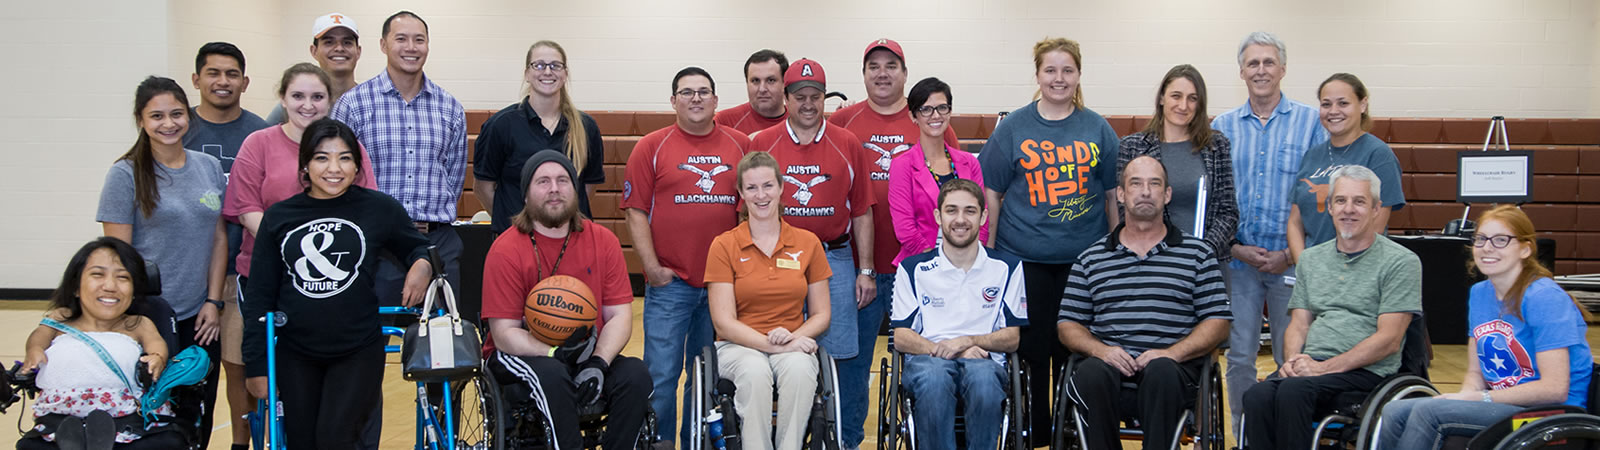 Group photo at a disability awareness activity in the gym